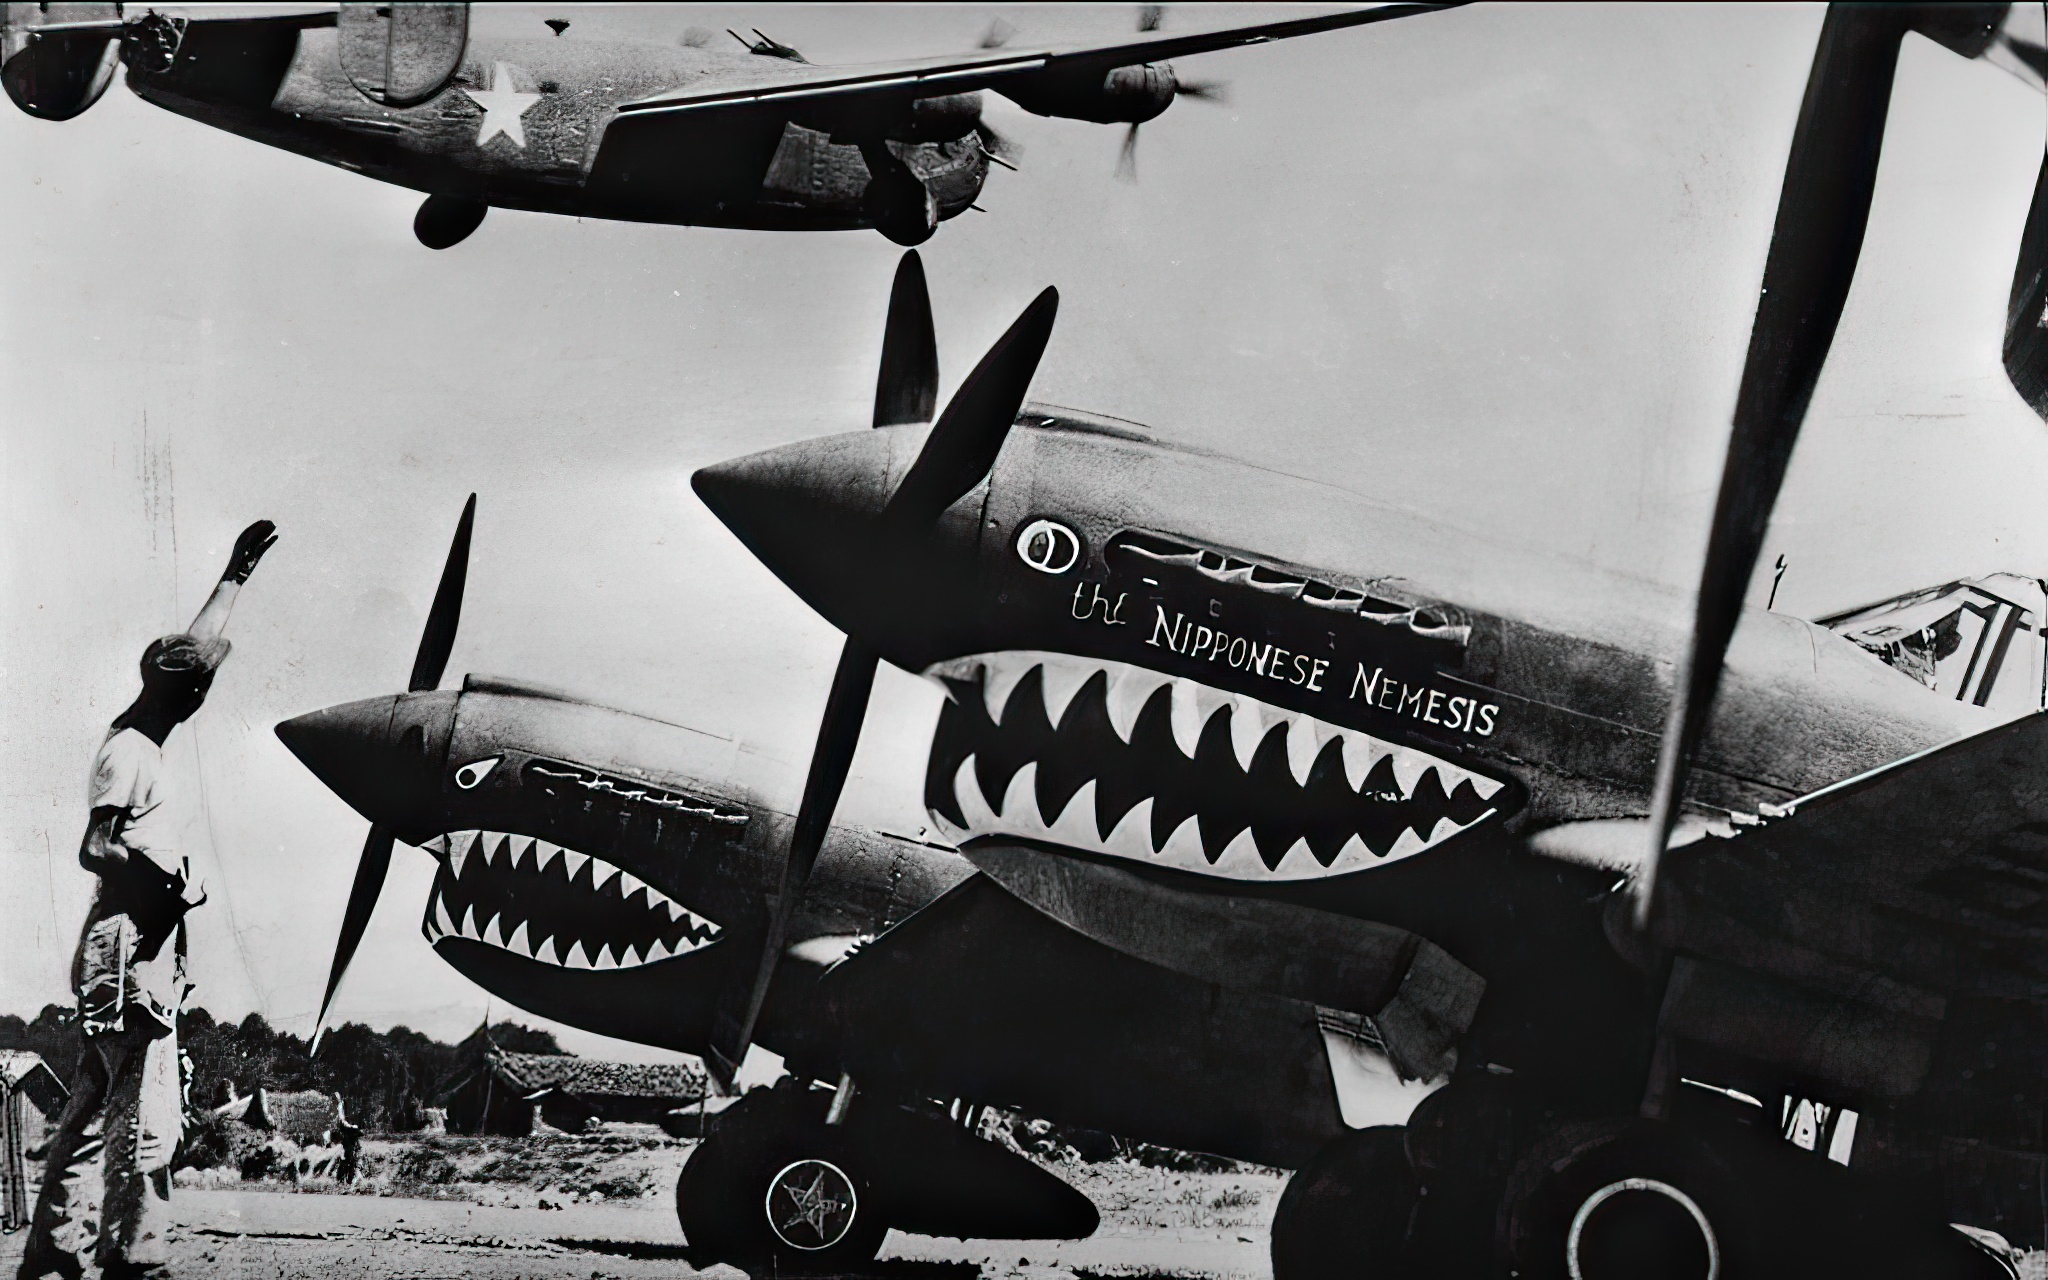 Aircrafts of the "Flying Tigers".